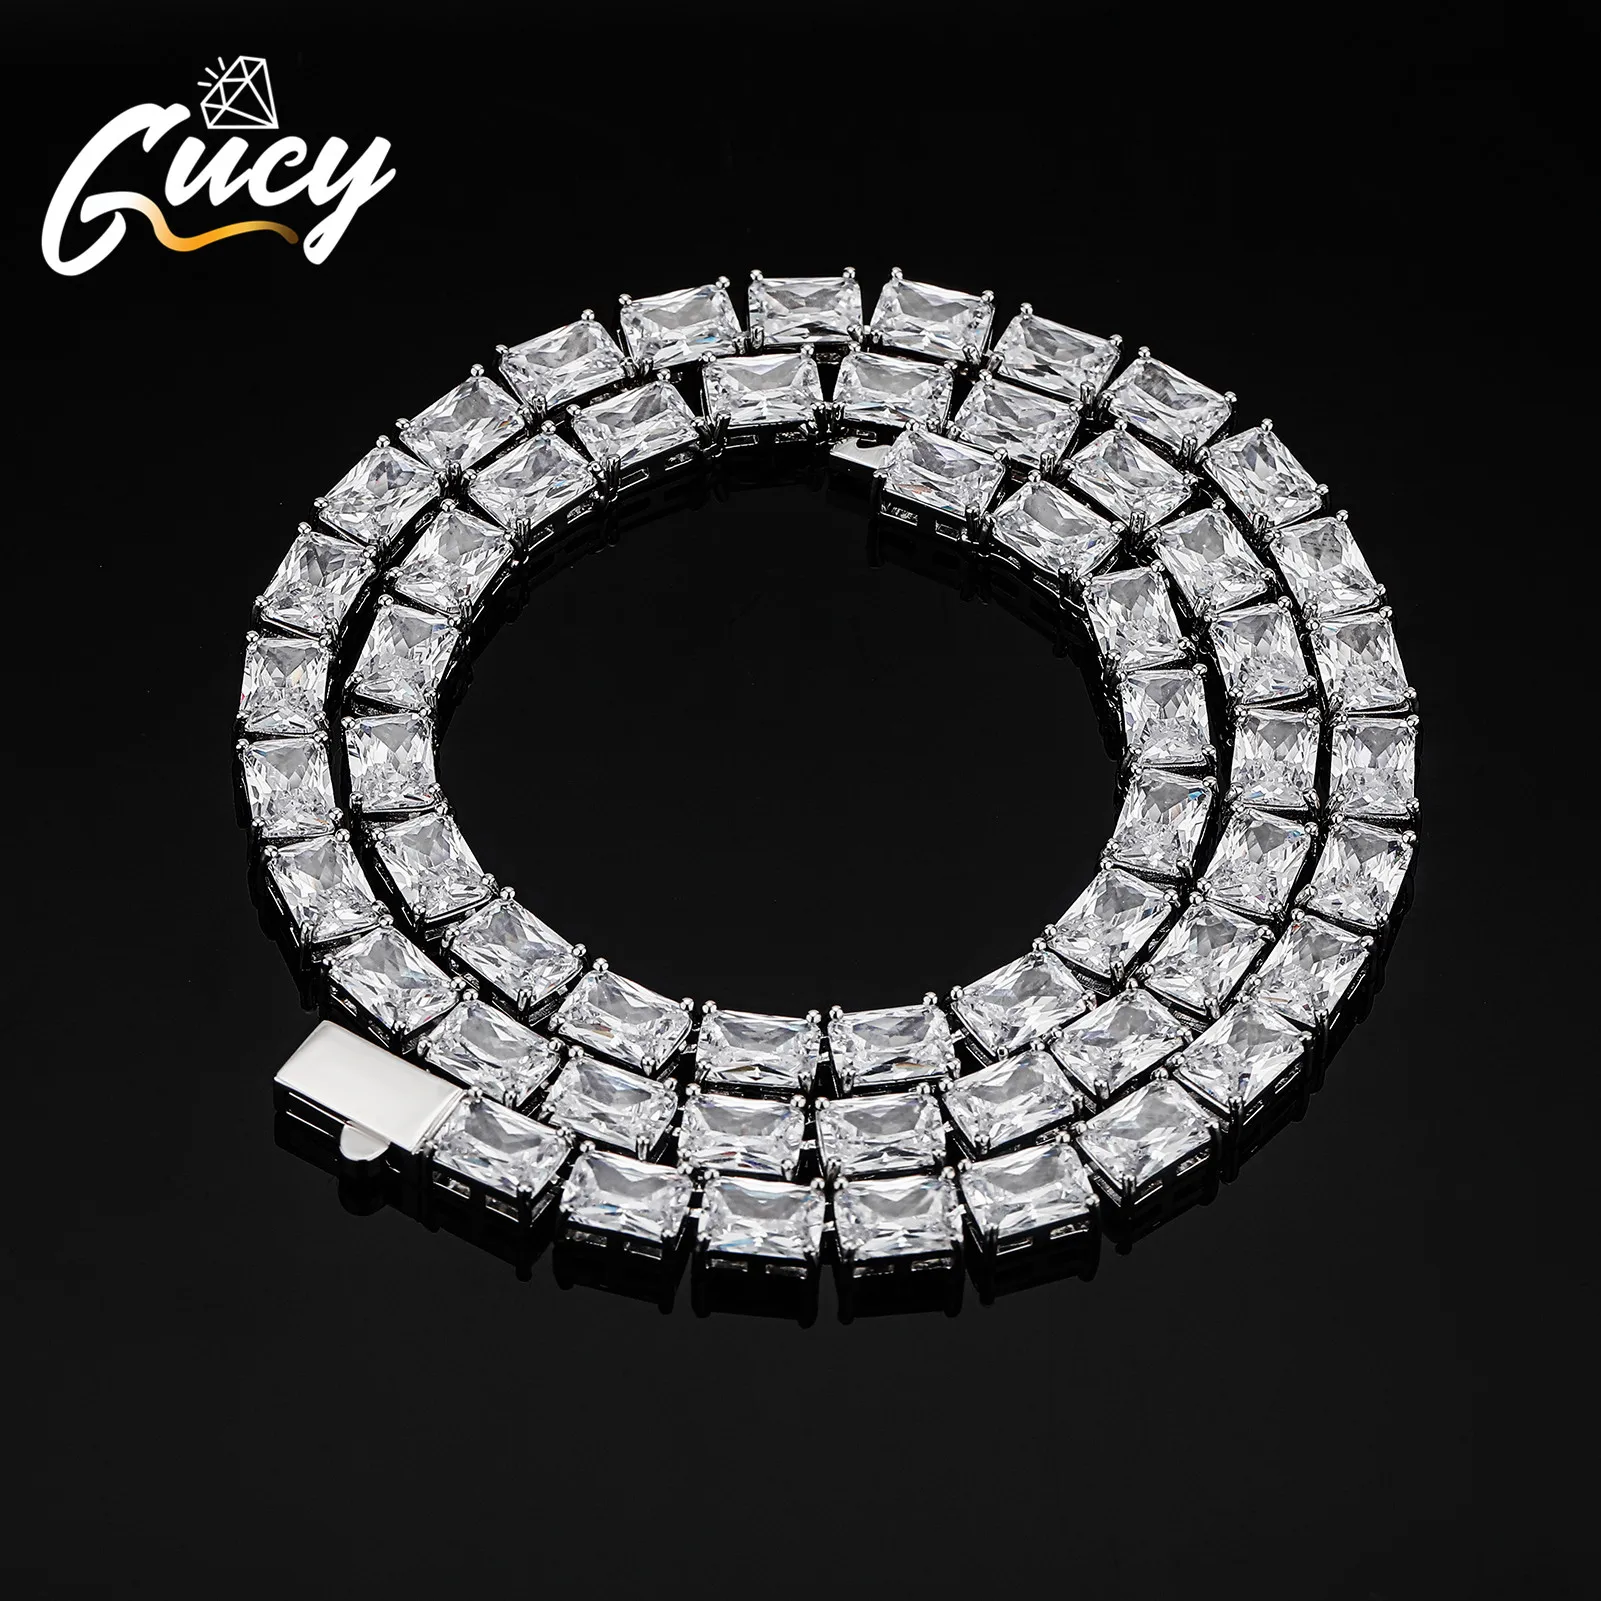 

GUCY Men Hip Hop Iced Out Bling CHain Necklace fashion 6mm Tennis Chain Choker Necklaces for Men Women Hip Hop Jewlery Gift